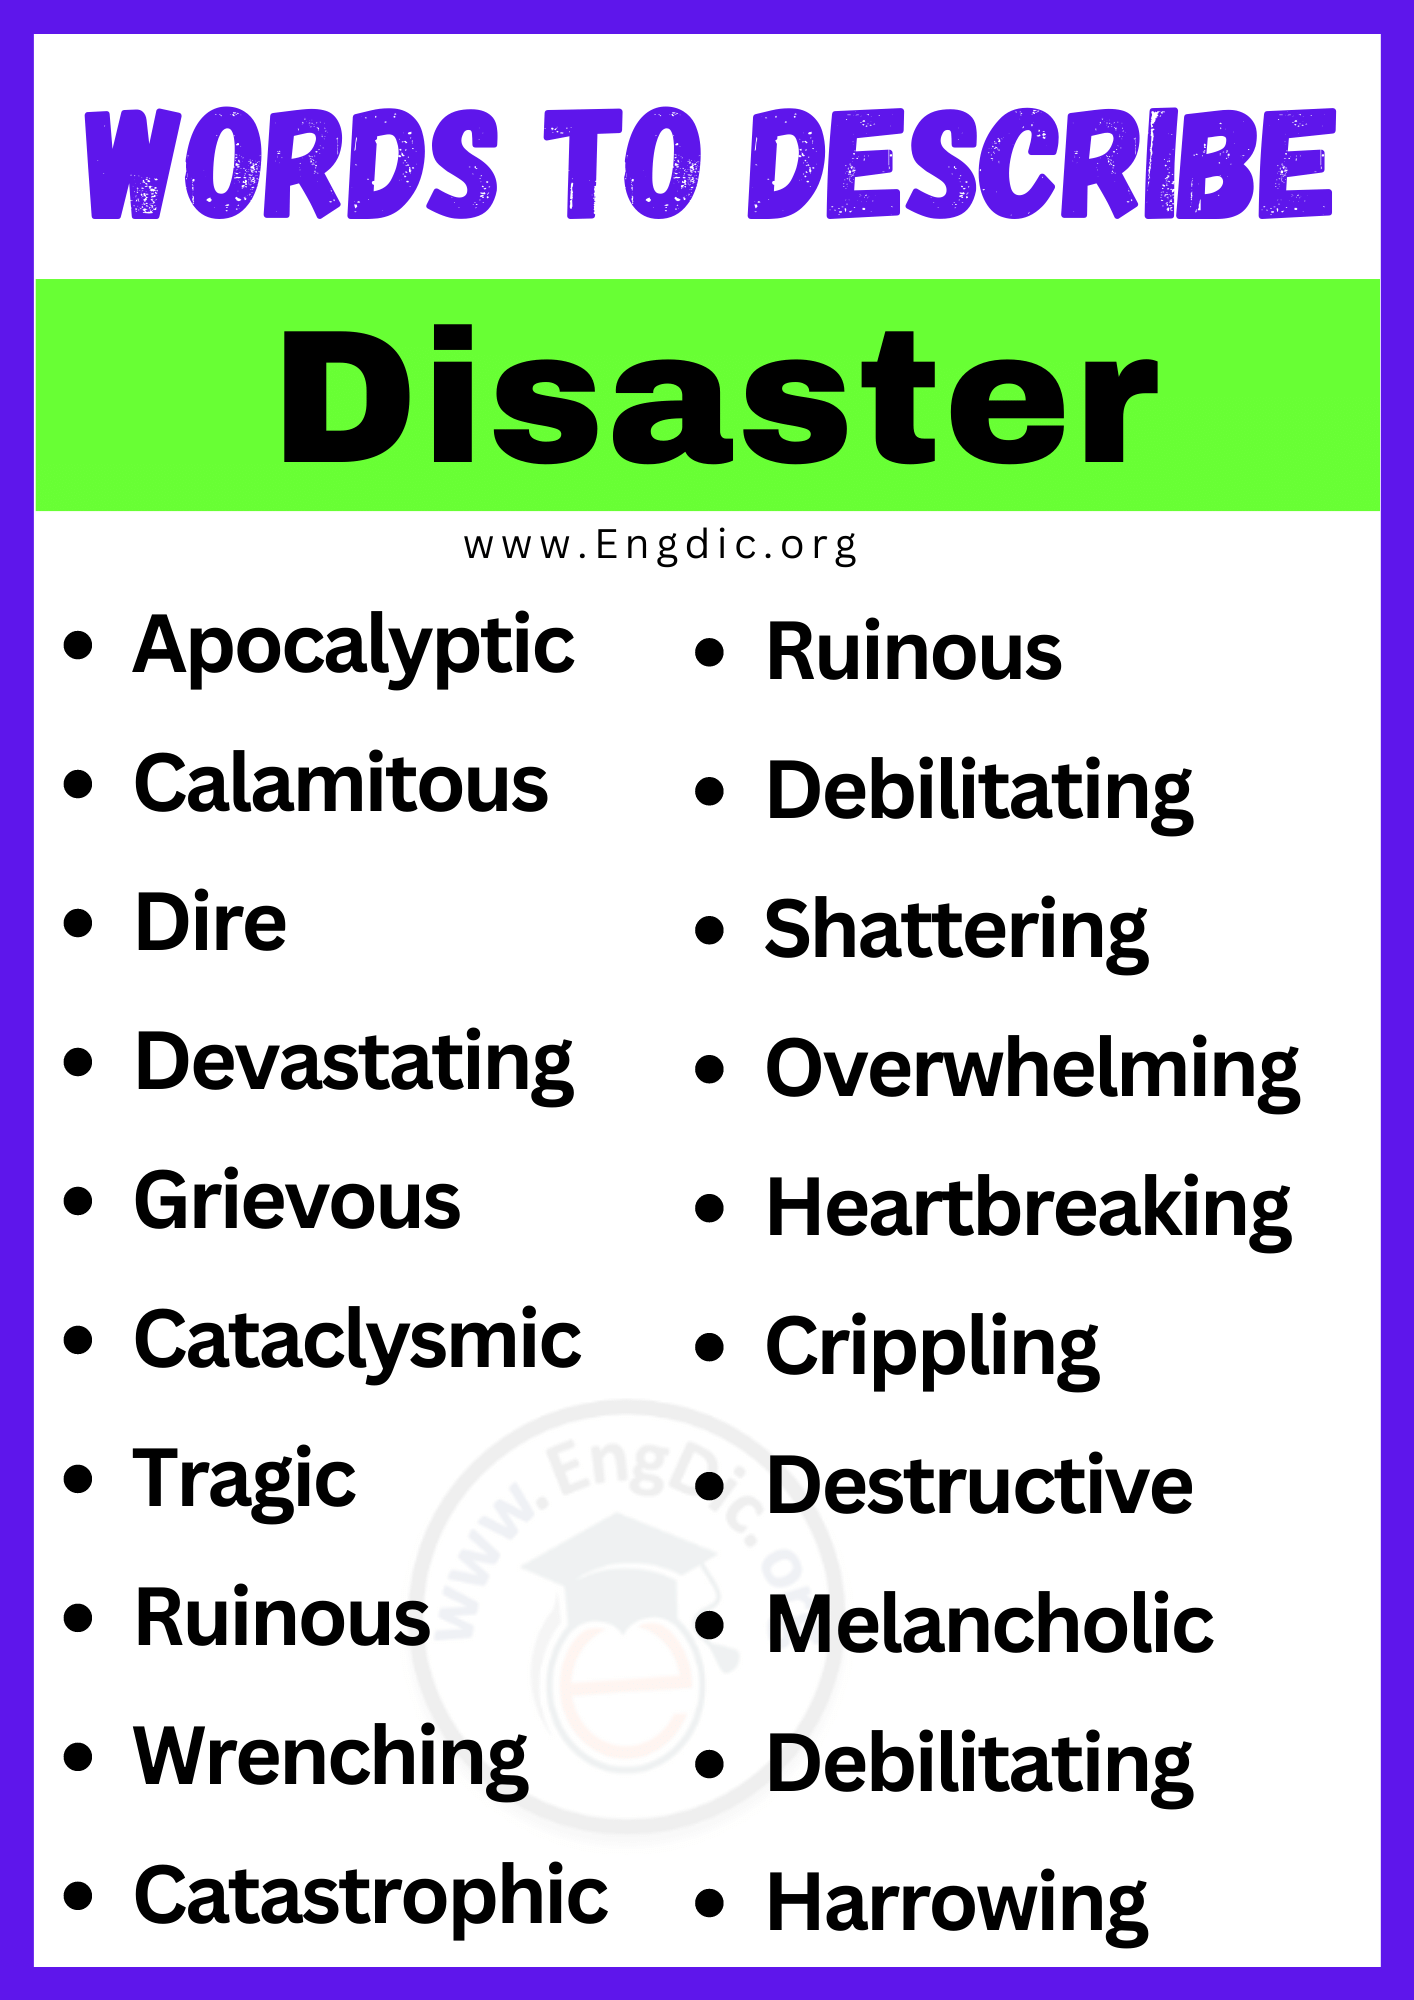 Words to Describe Disaster